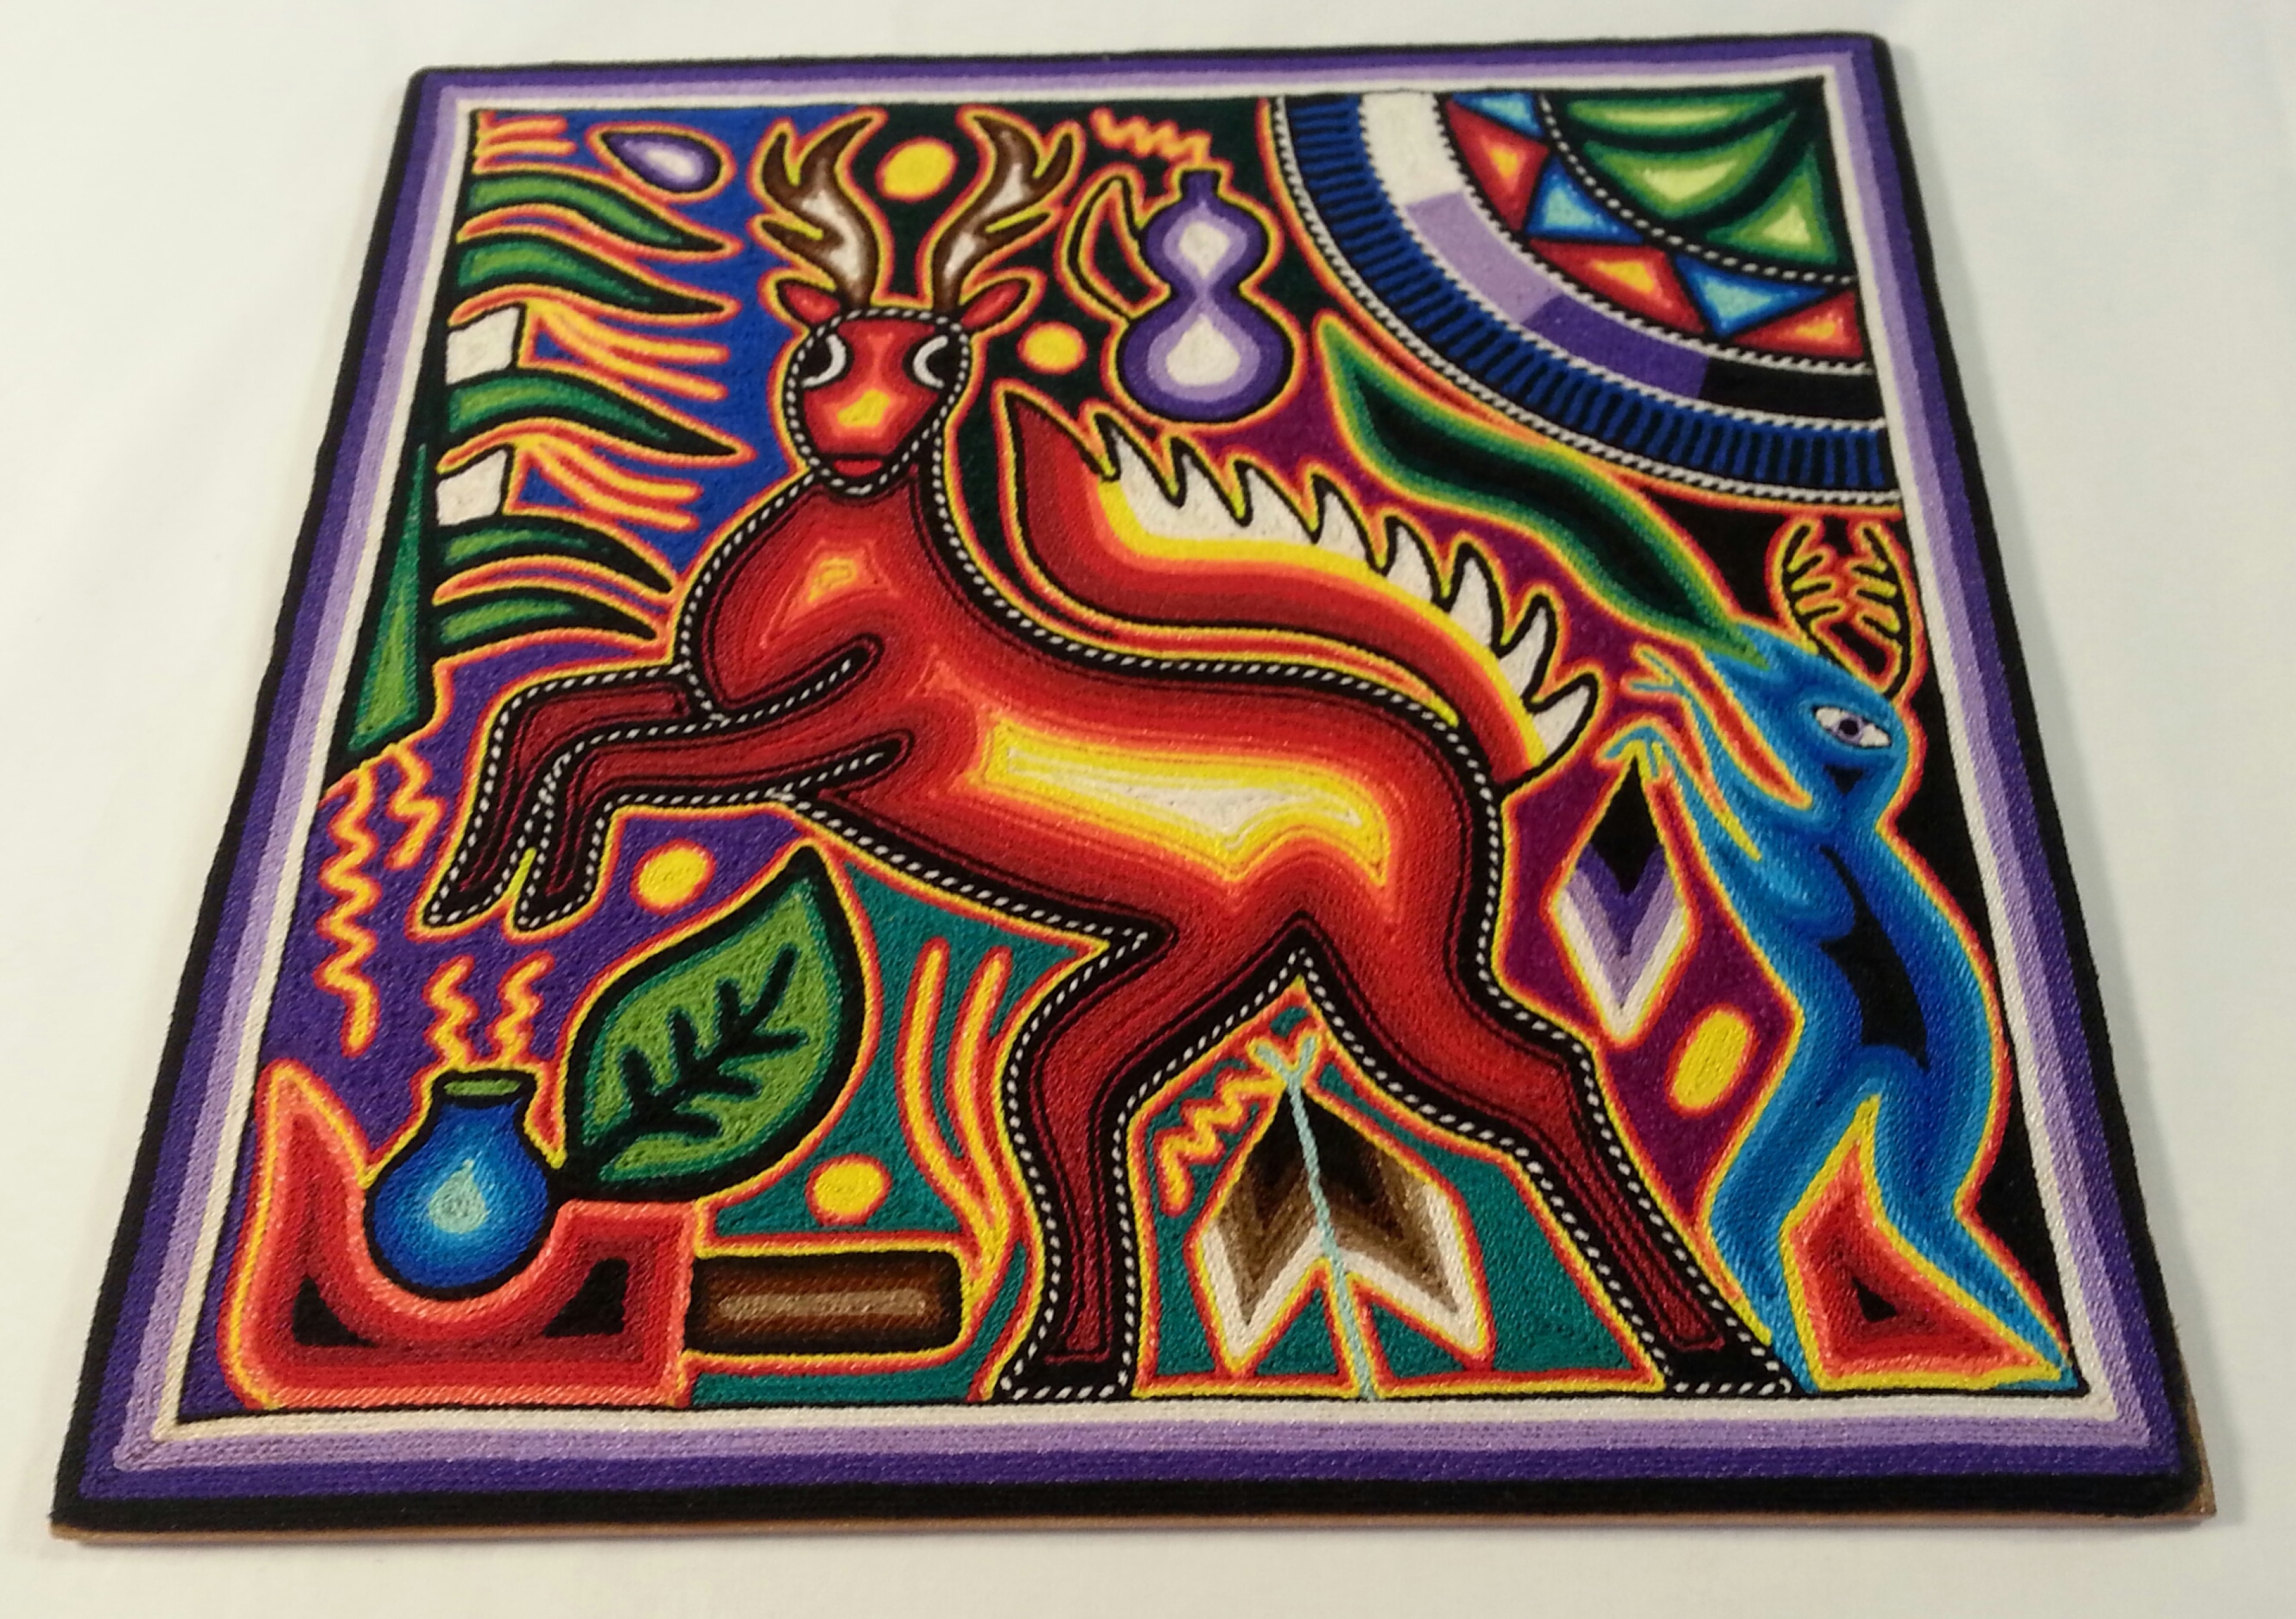 Mexico: Create a Huichol Yarn Painting - Timothy S. Y. Lam Museum